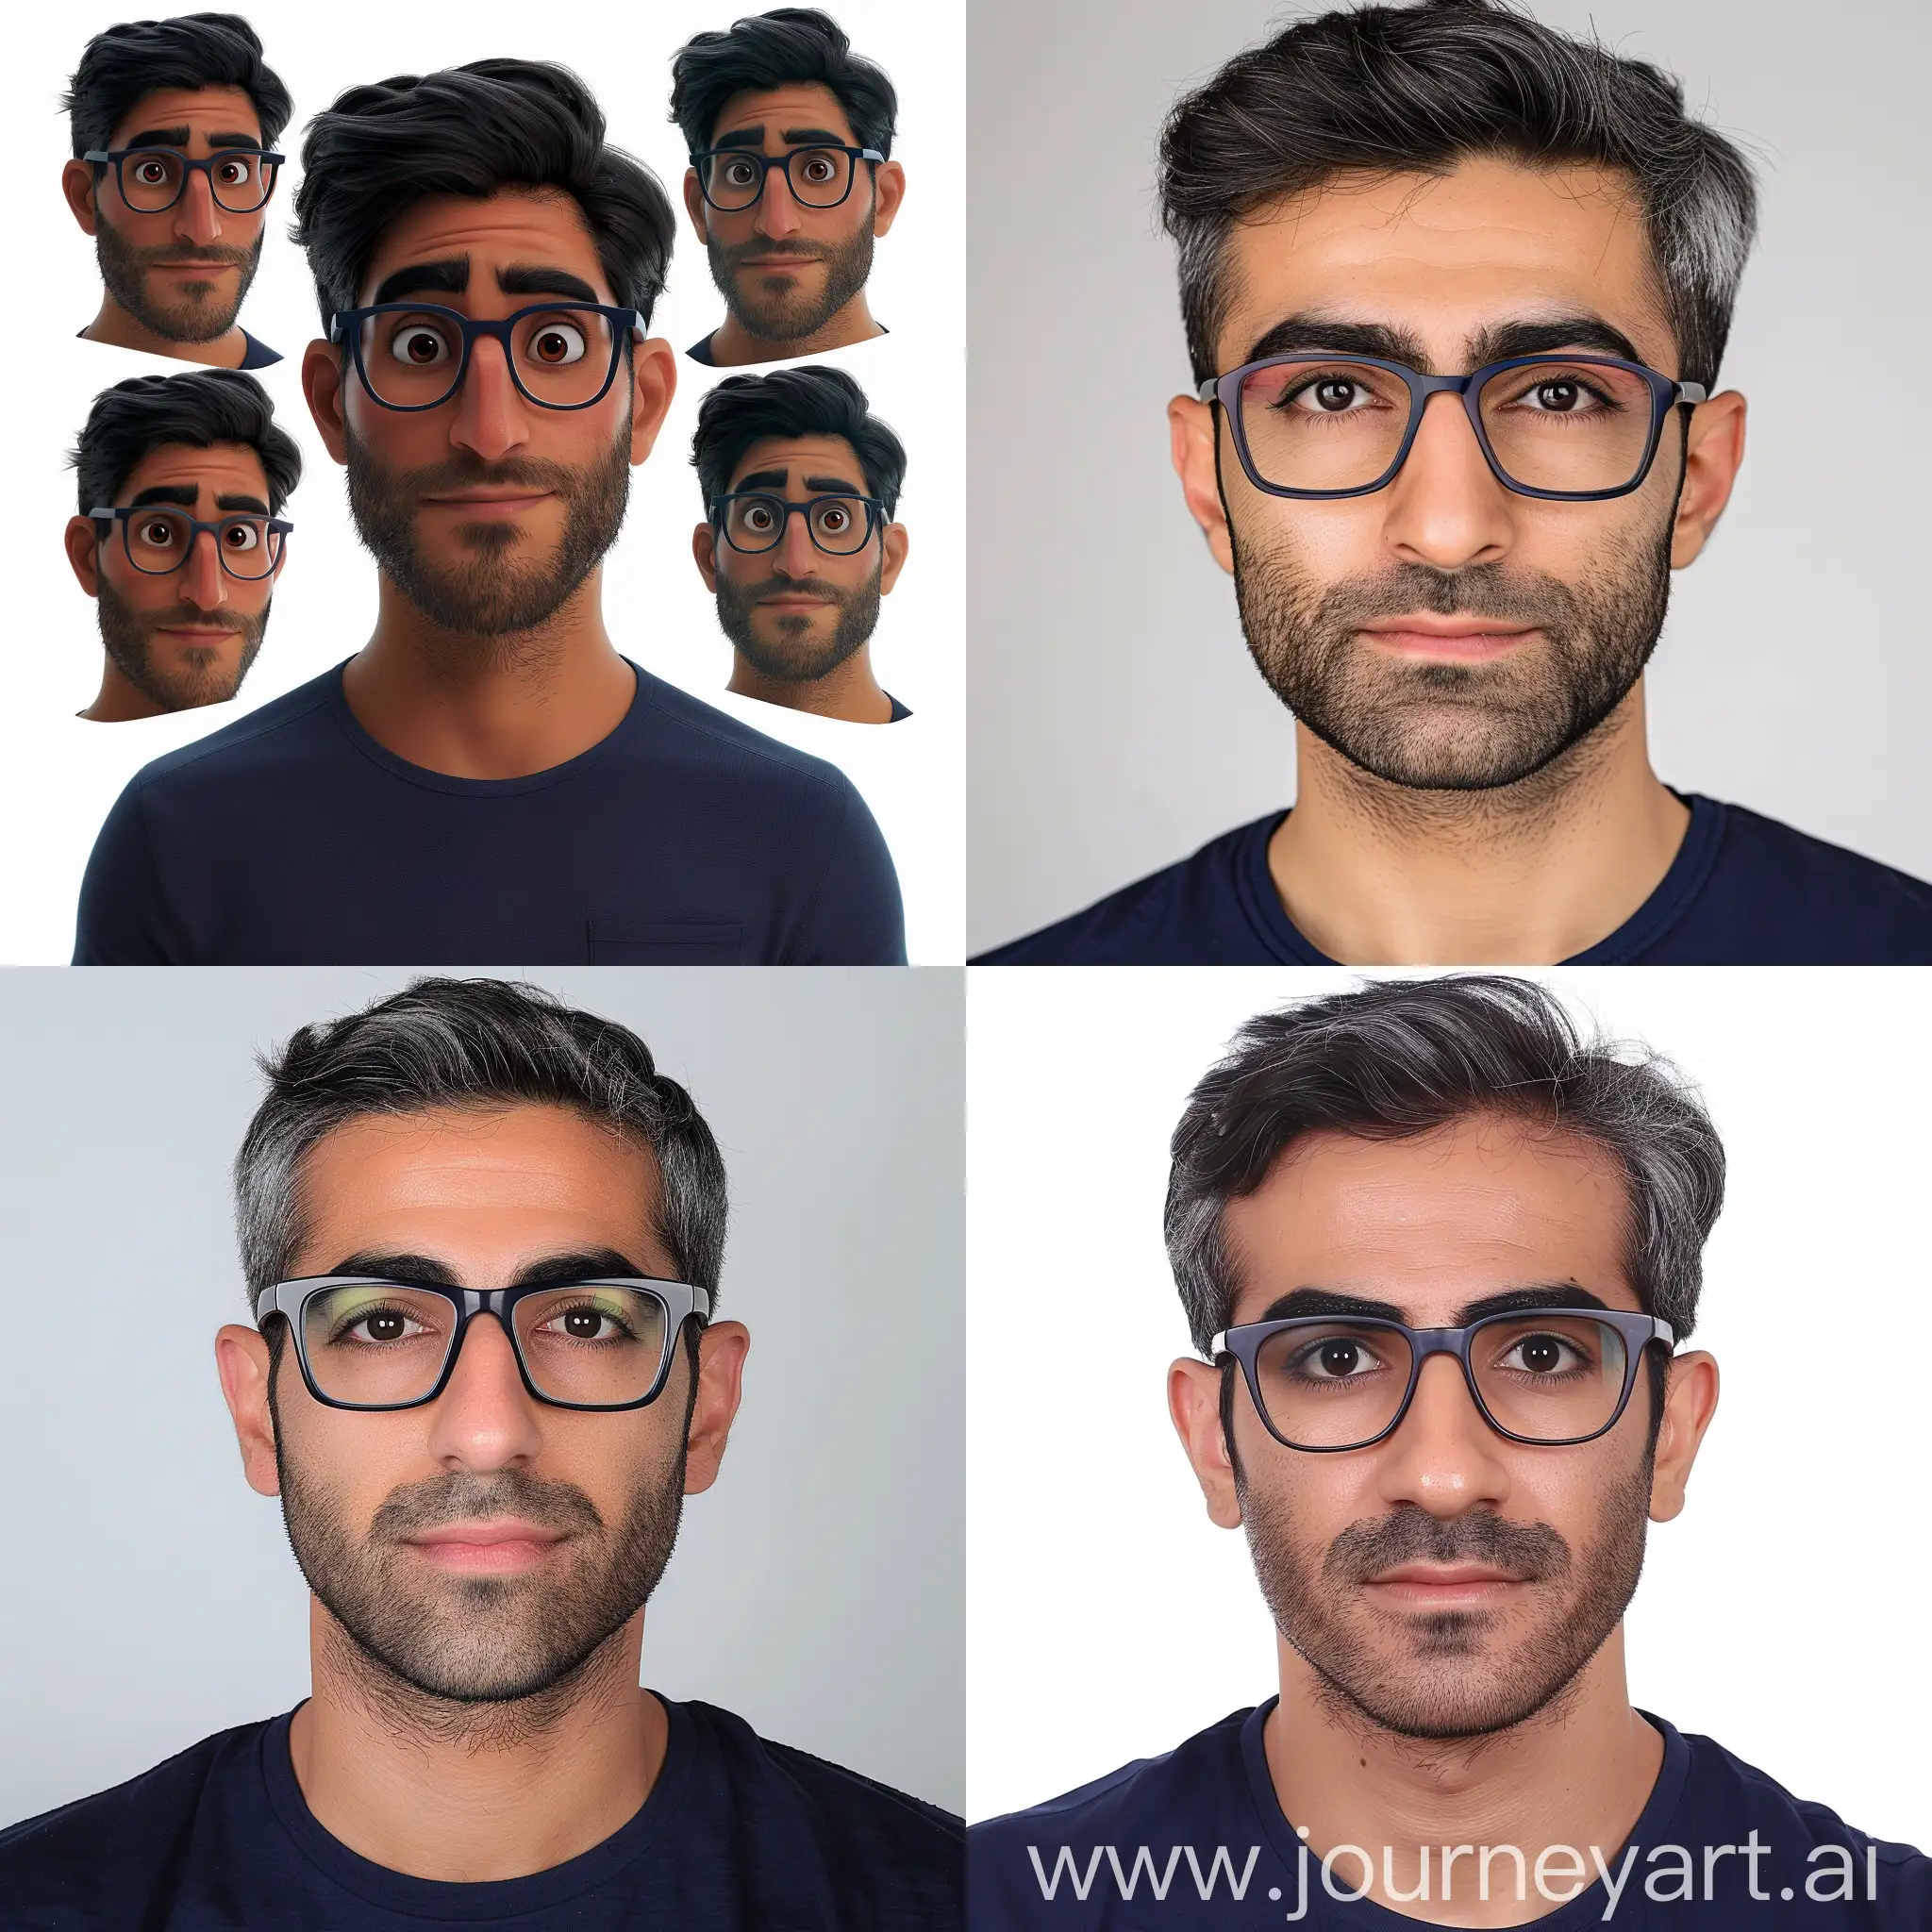 Five-Disney-PixarInspired-Portraits-of-a-25YearOld-Iranian-Man-with-Rectangular-Frame-Glasses-and-Navy-Blue-Shirt